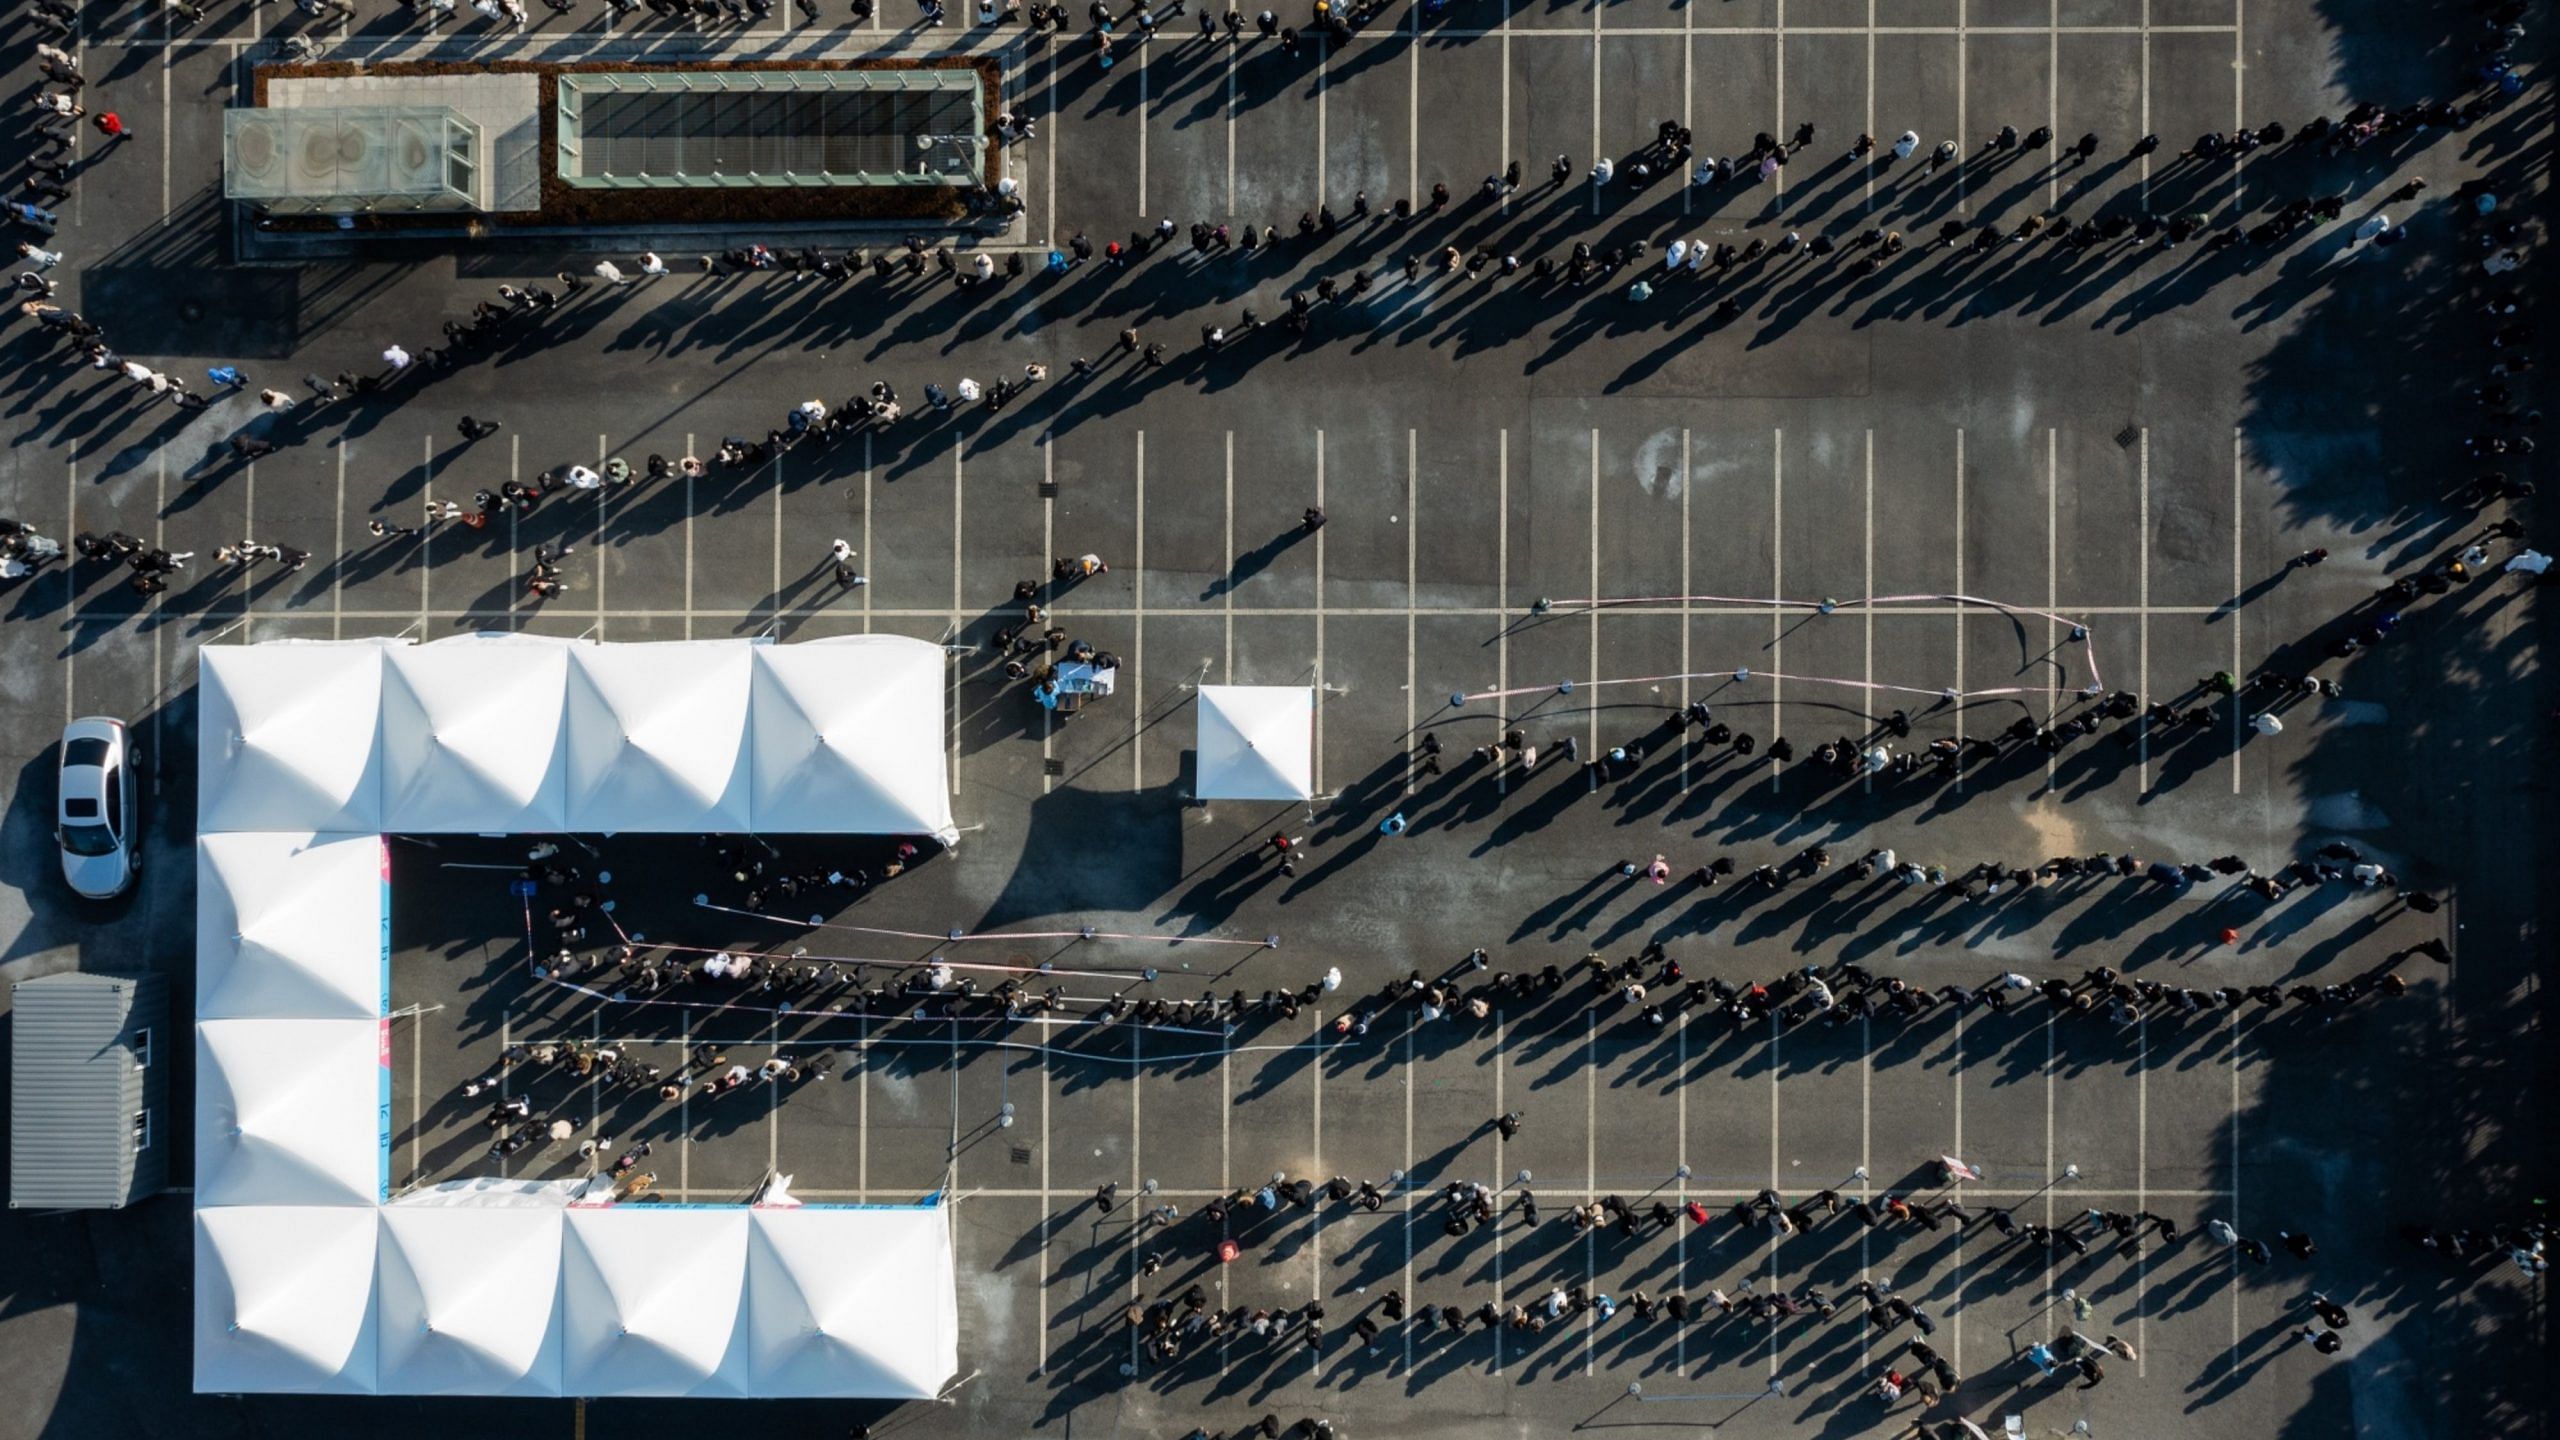 Queues at a testing station in Seoul on Feb. 6. Photographer: SeongJoon Cho/Bloomberg